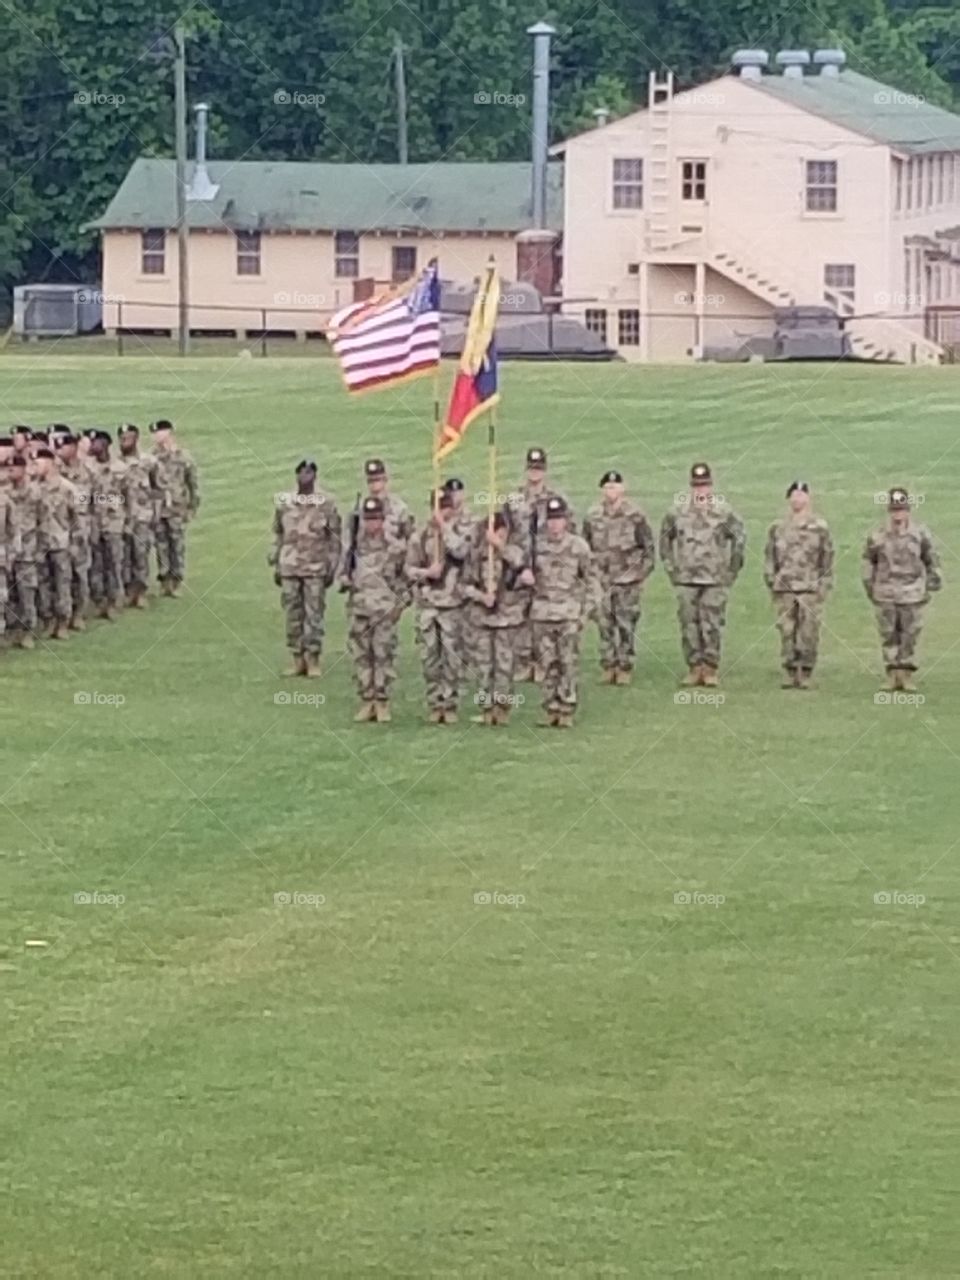 My brother's Graduation. Infantry strong!